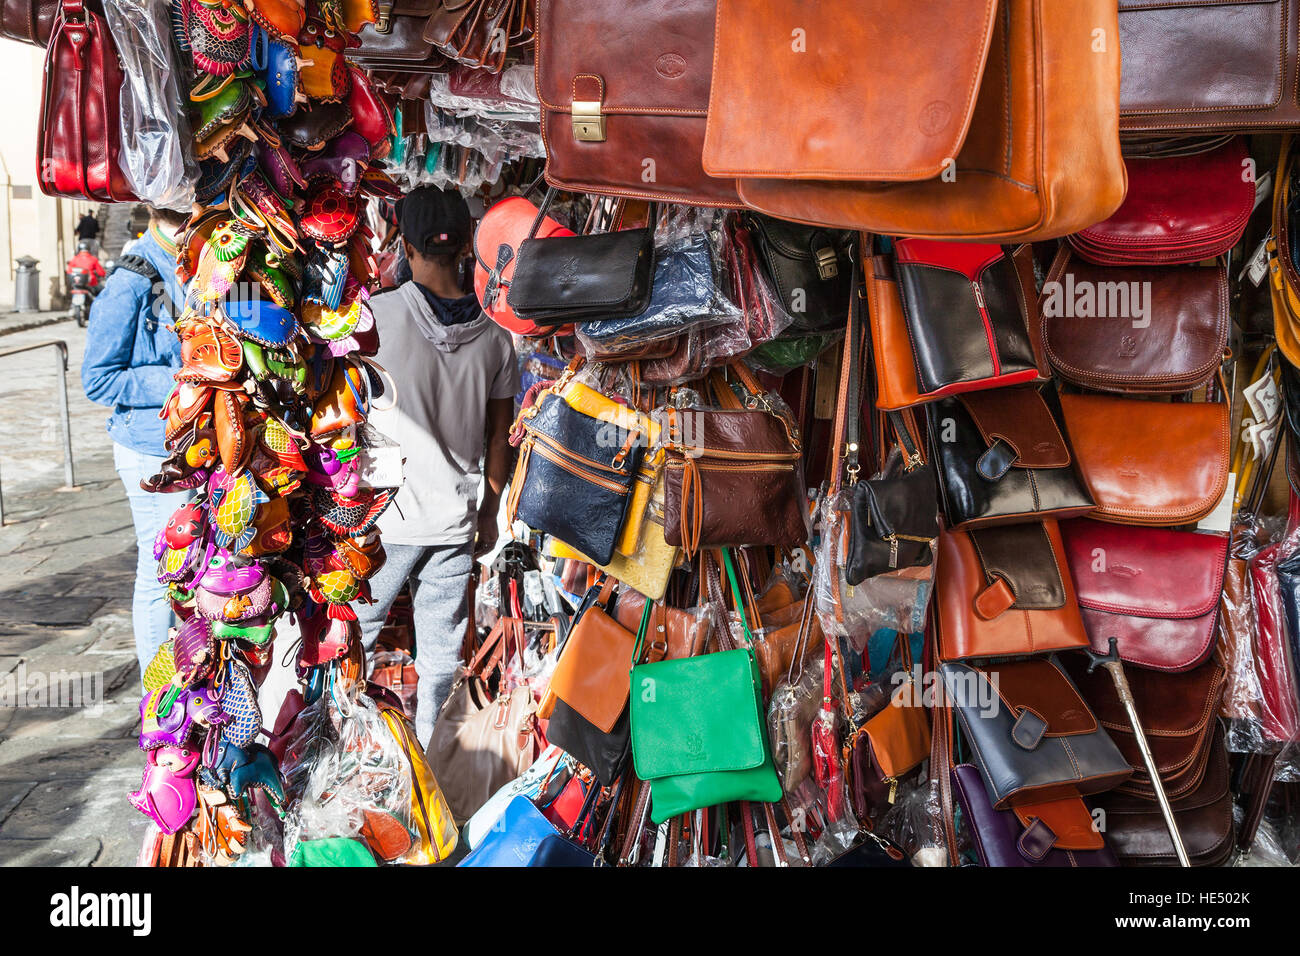 FLORENCE, ITALY - NOVEMBER 6, 2016: shopping in local leather bags on Stock Photo: 129187595 - Alamy